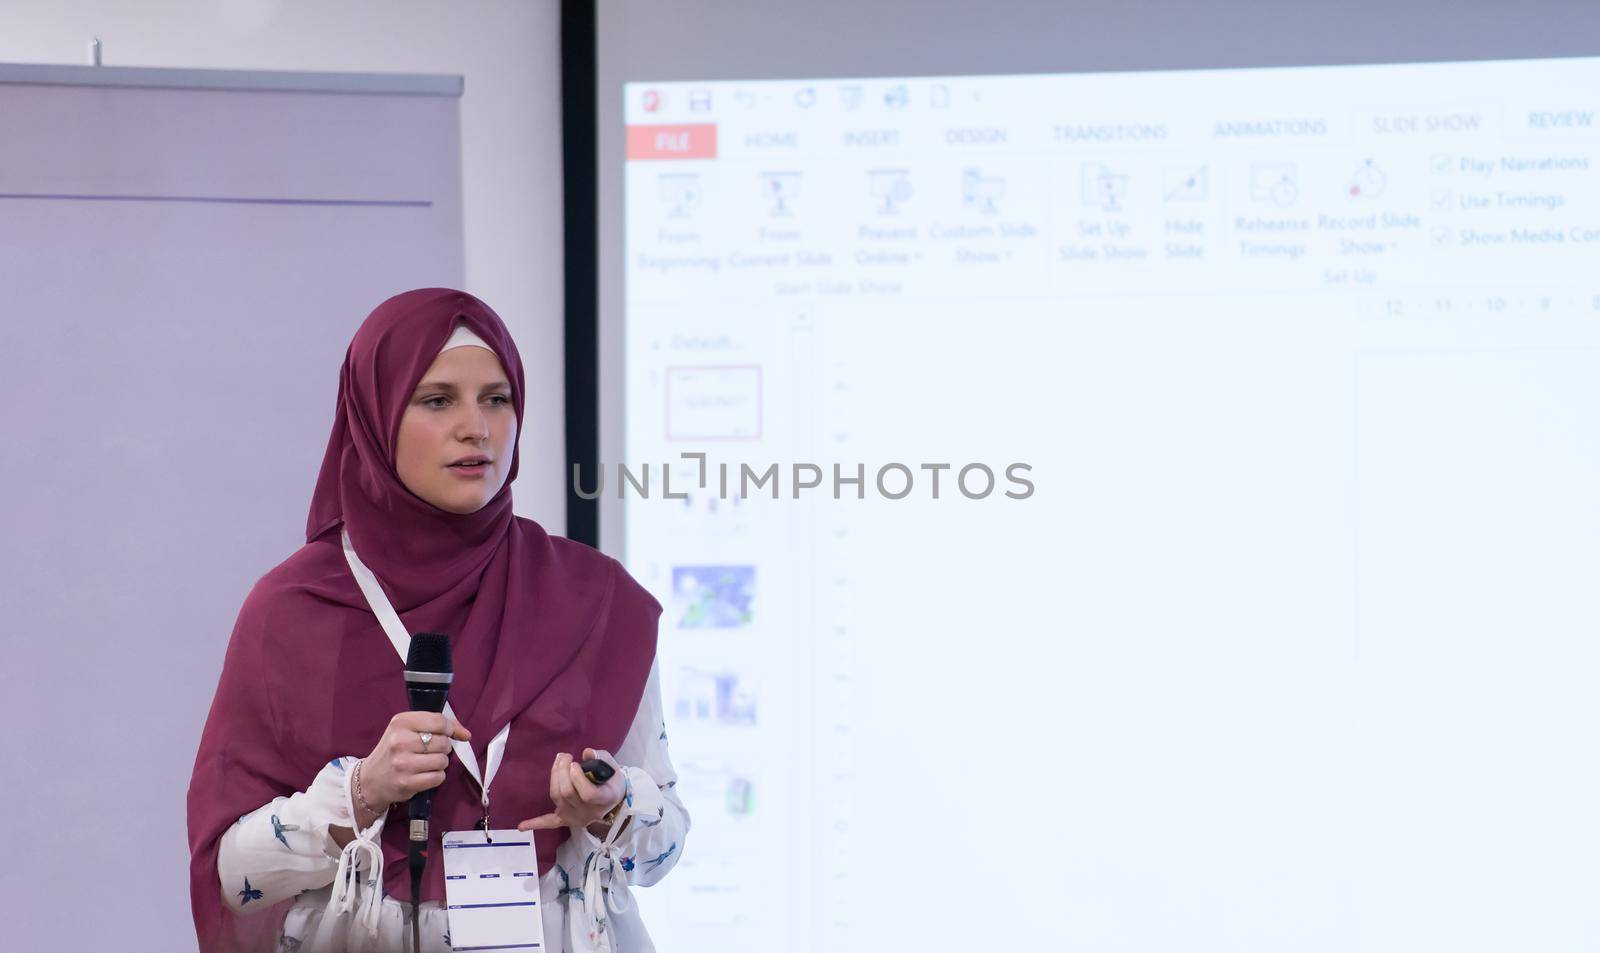 young muslim businesswoman with red scarf at business conference room giving public presentations. Audience at the conference hall. Entrepreneurship club